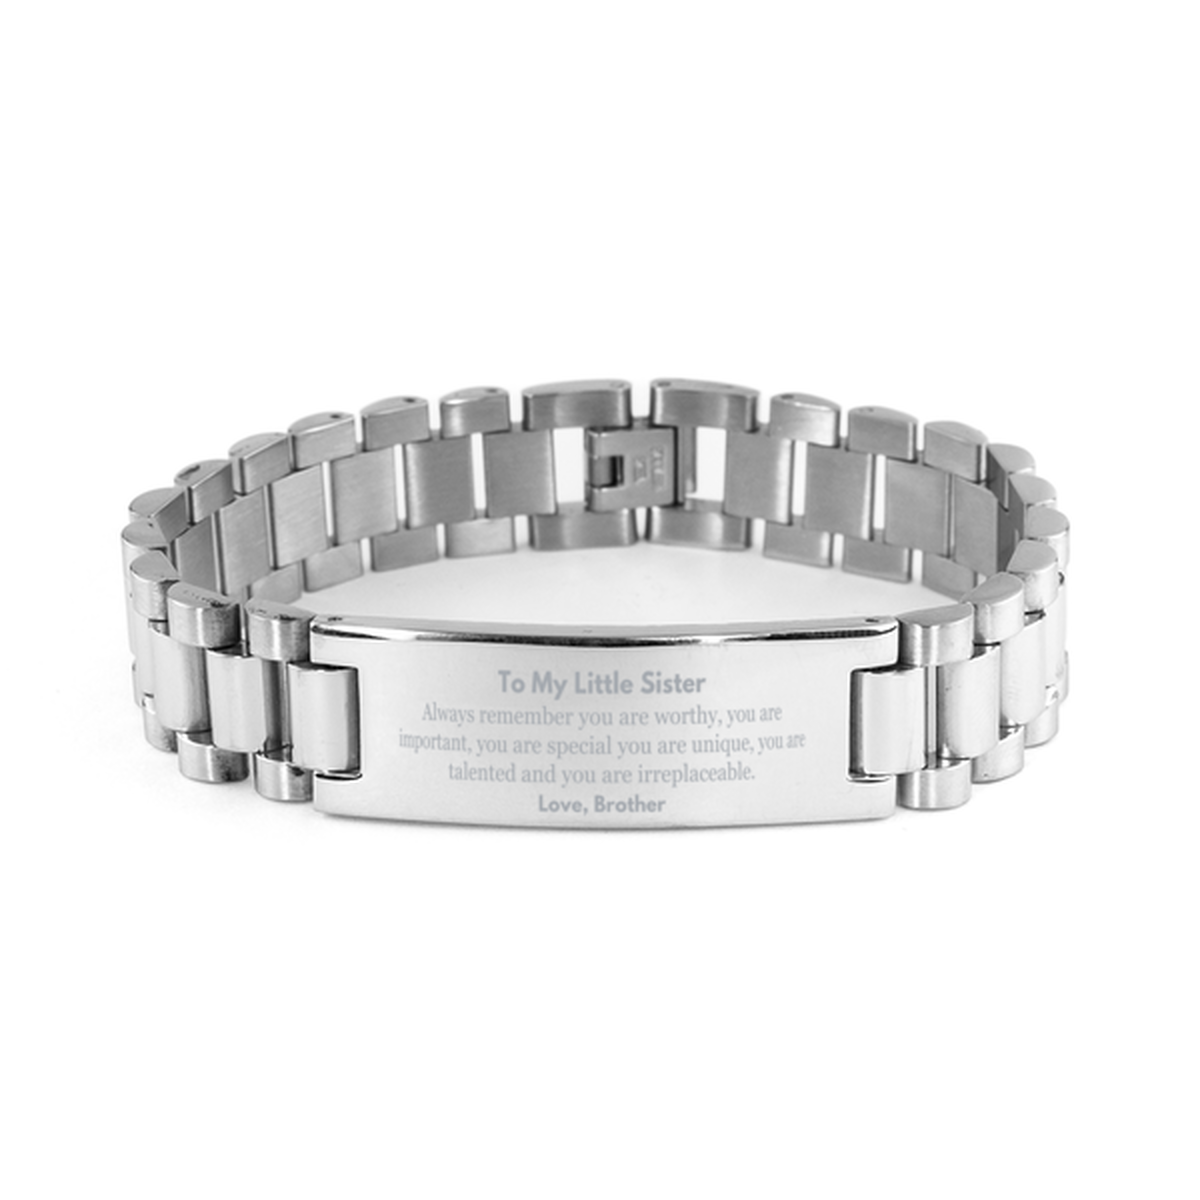 Little Sister Birthday Gifts from Brother, Inspirational Ladder Stainless Steel Bracelet for Little Sister Christmas Graduation Gifts for Little Sister Always remember you are worthy, you are important. Love, Brother